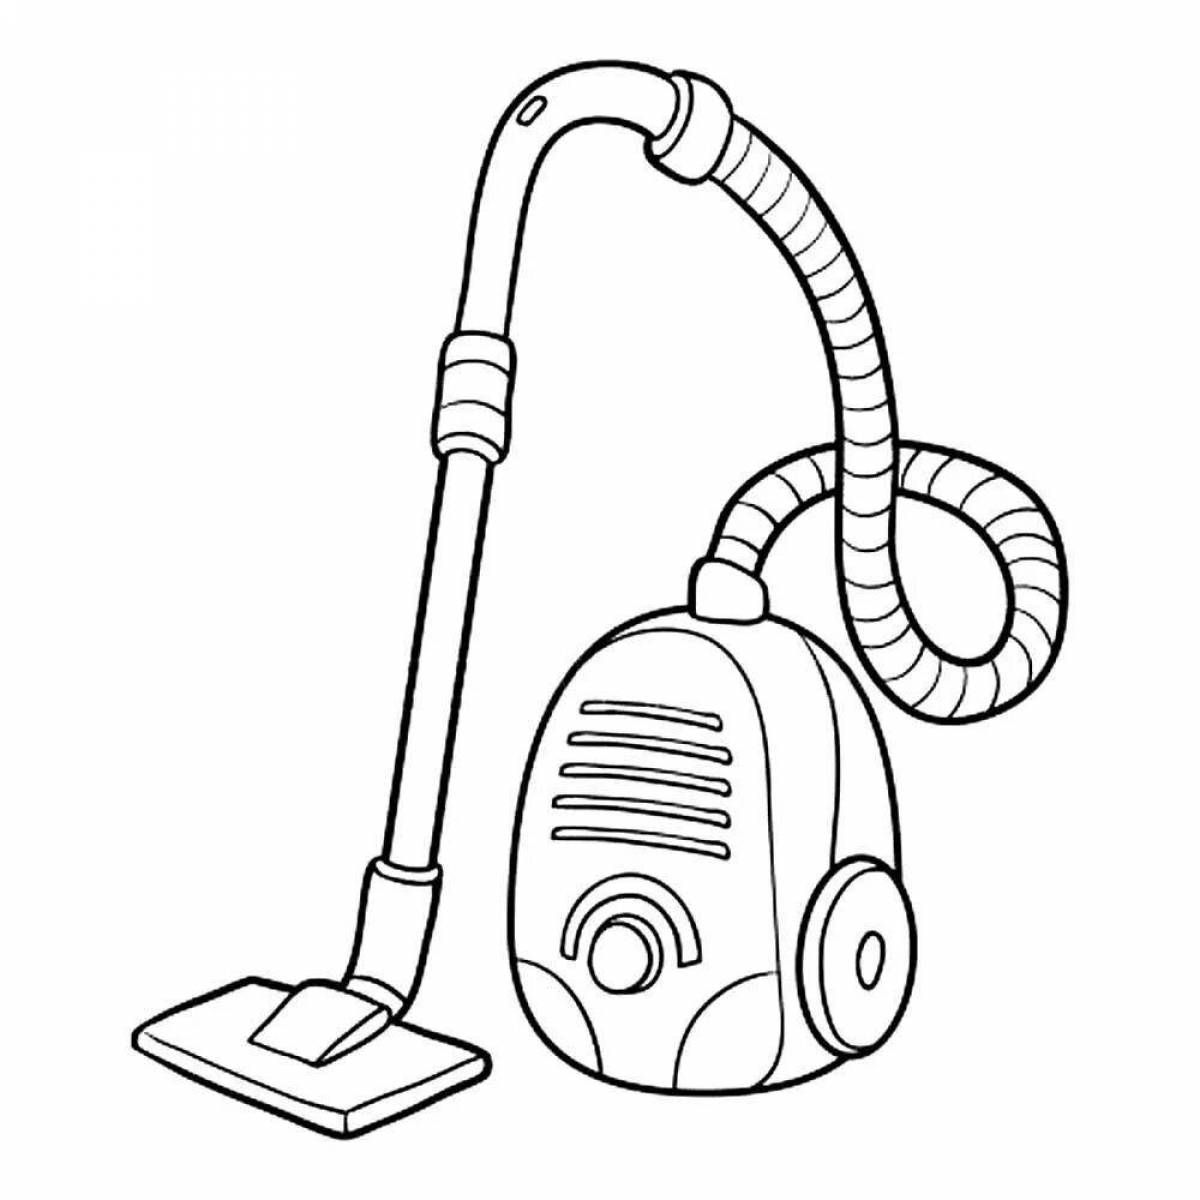 Adorable vacuum cleaner coloring page for kids